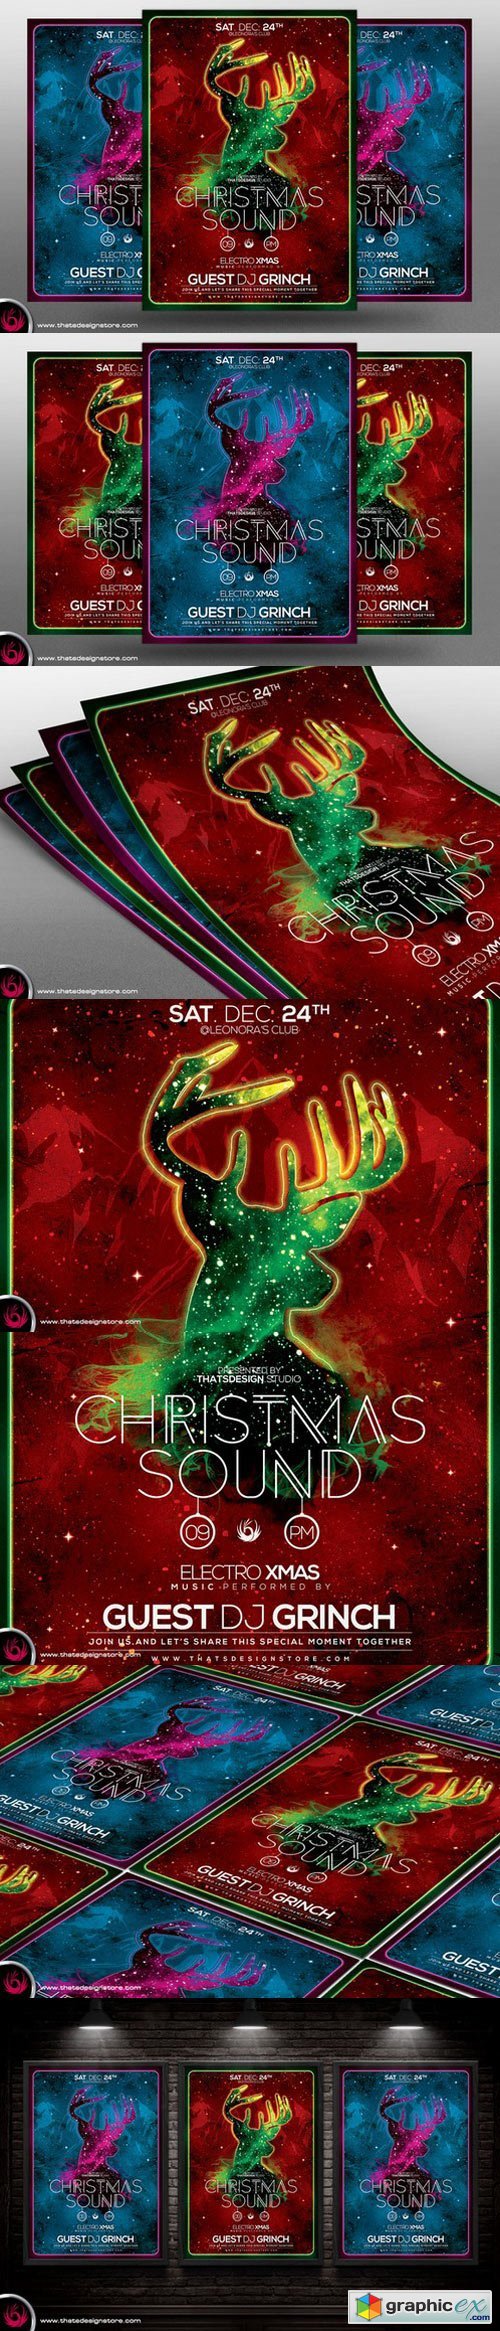 Christmas Sound Flyer Template 422706